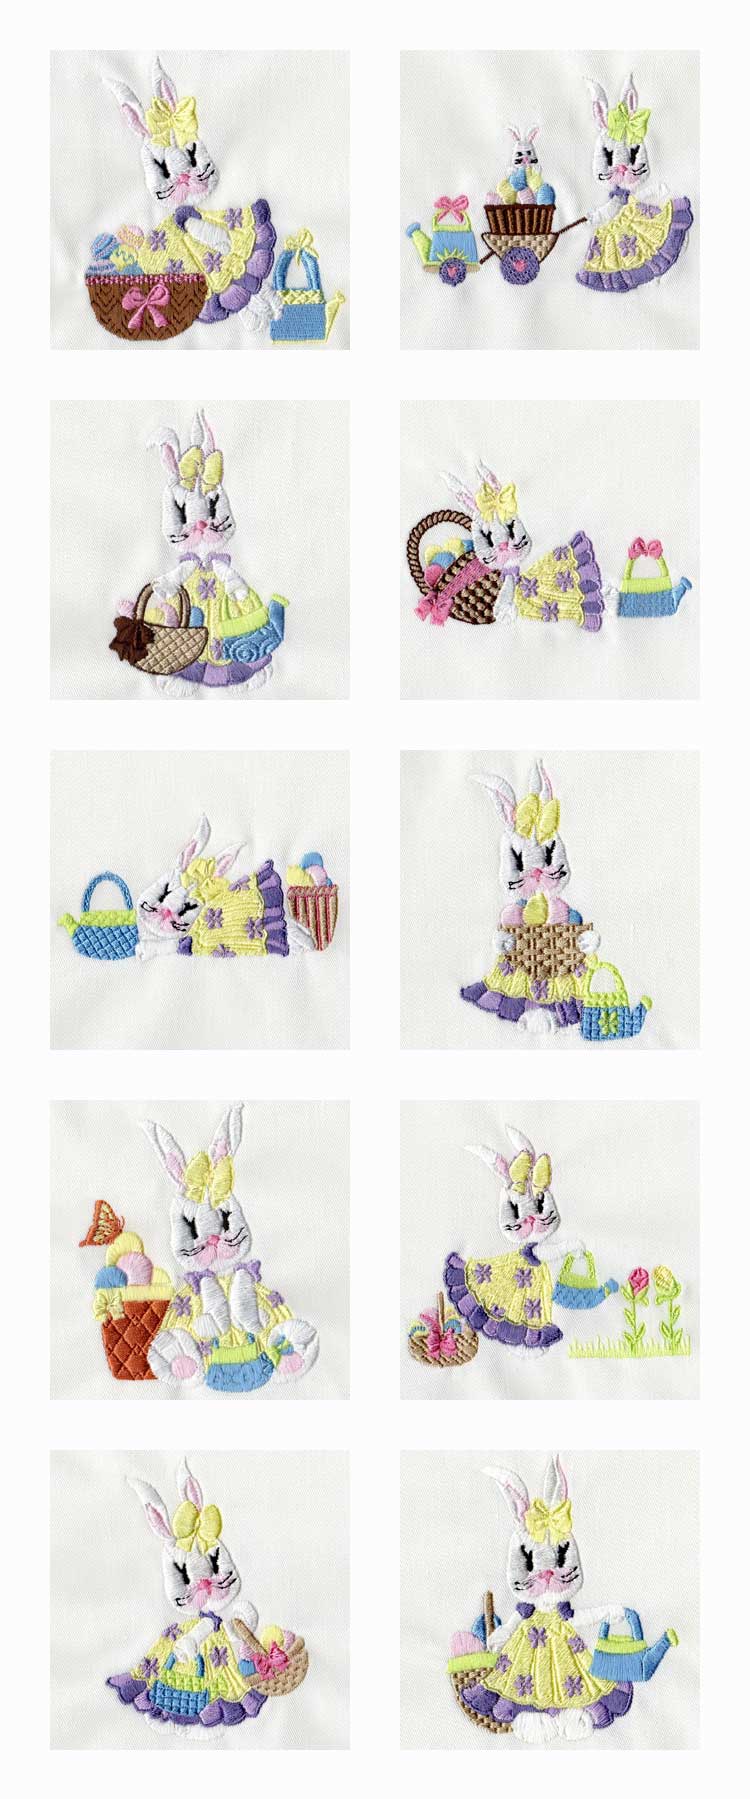 Mrs Bunny Embroidery Machine Design Details